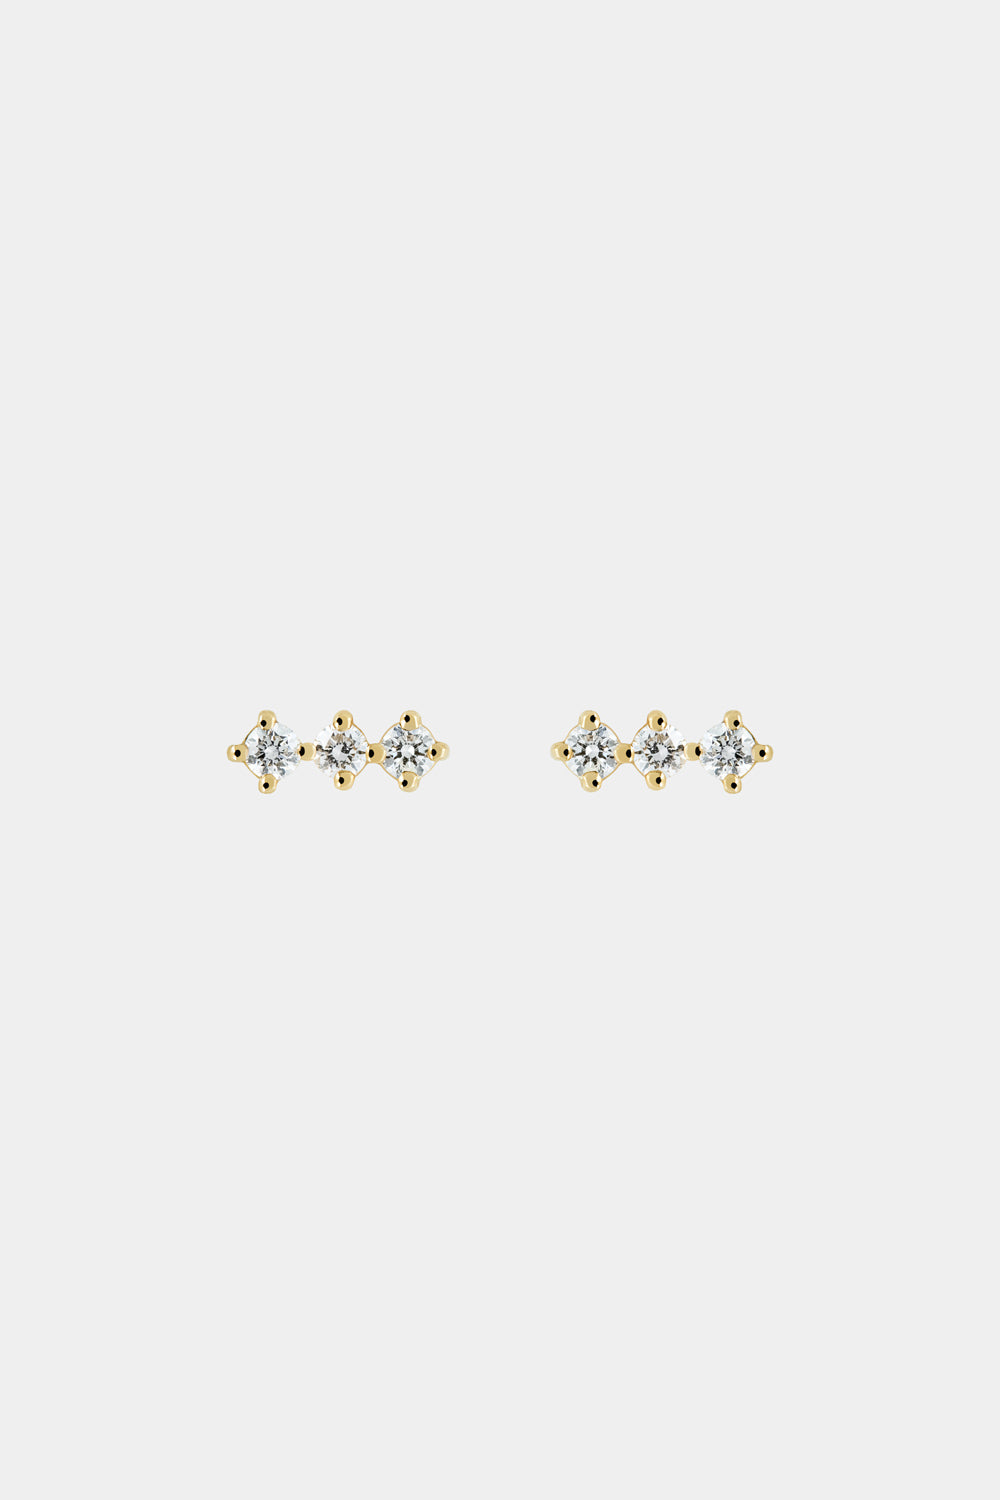 Buttercup Diamond Bar Earrings | Yellow Gold, More Options Available